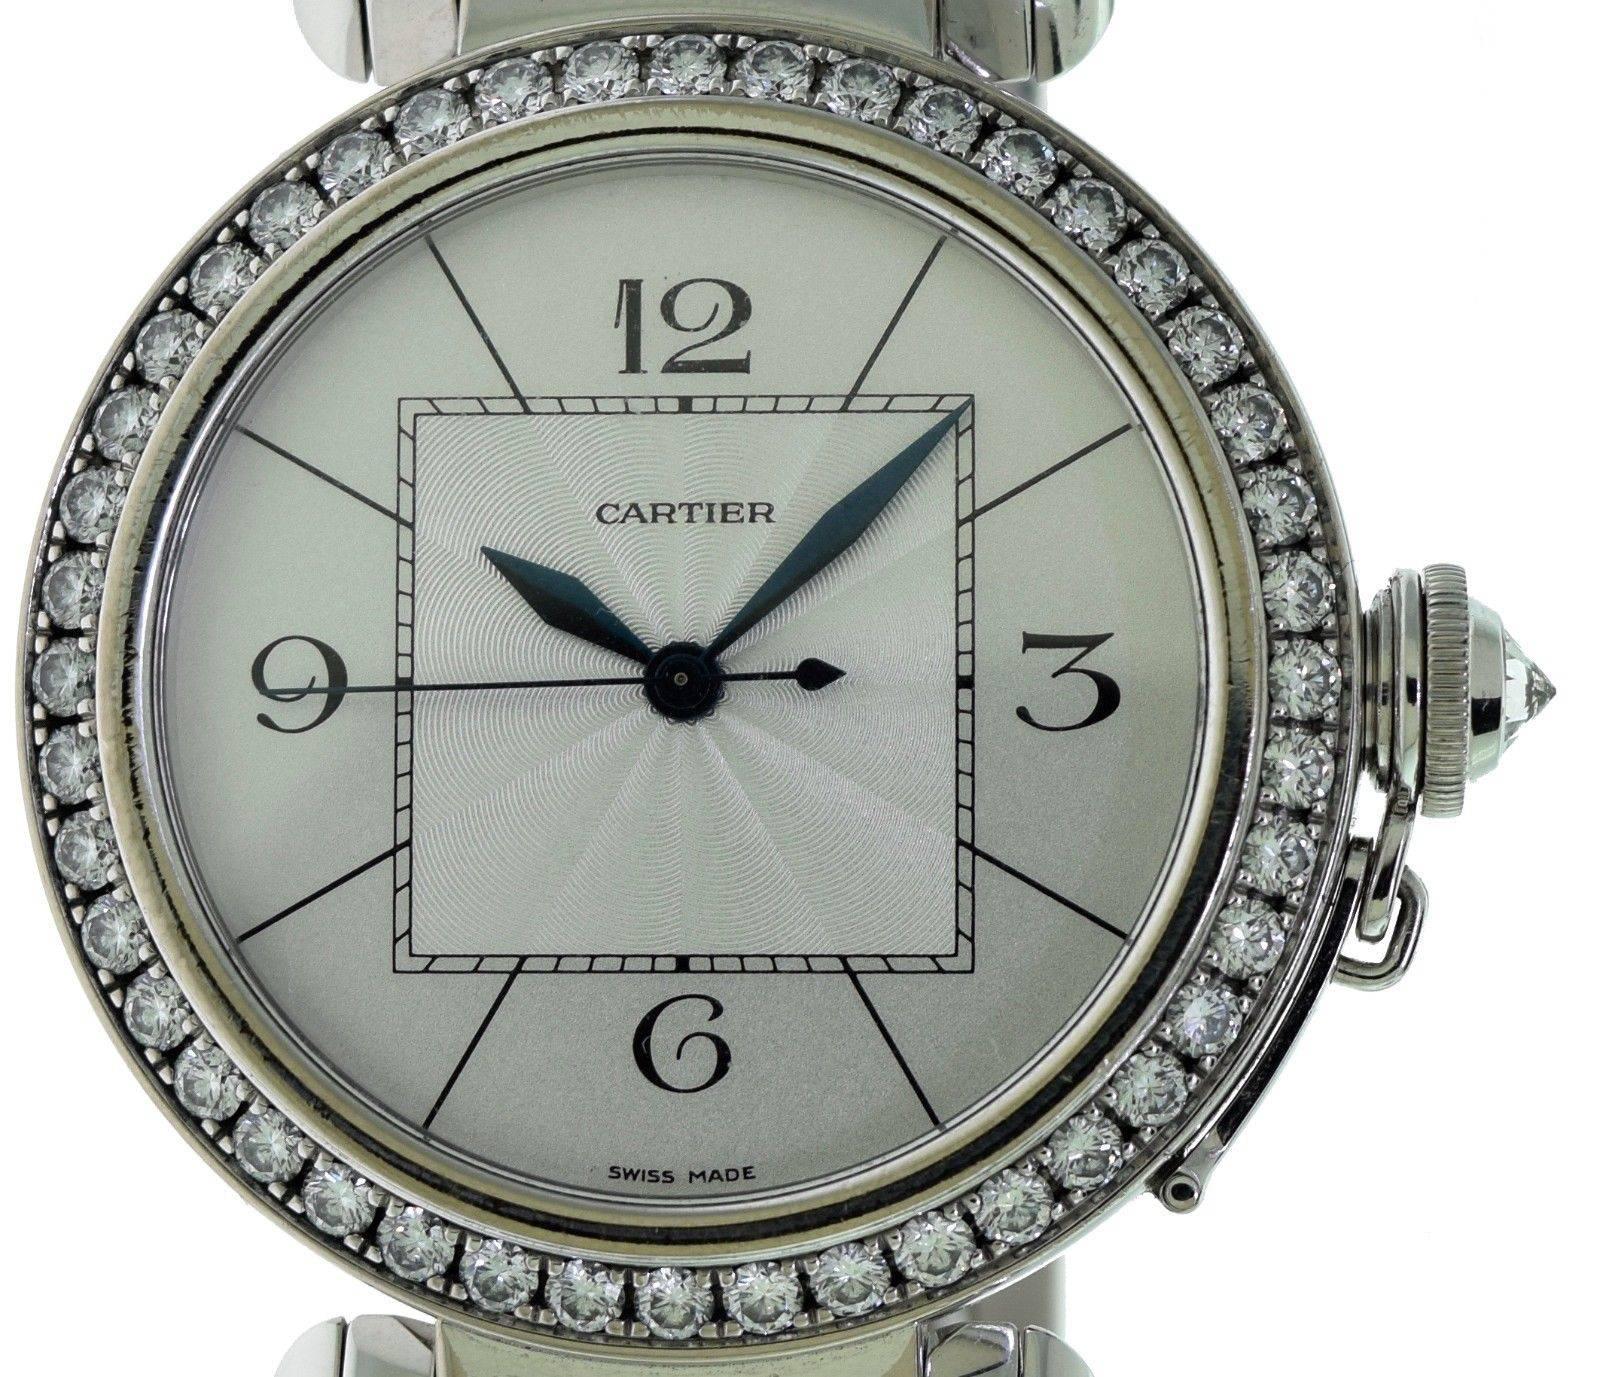 Designer: Cartier
Collection: Pasha
Model: Pasha
Reference: Cartier - 2765
Movement: Automatic
Case Material: White Gold
Shape/Form: Round
Bracelet Material: White Gold
Clasp Type: Folding Clasp

Case Size: 42 mm
Thickness: 8.6 mm
Total